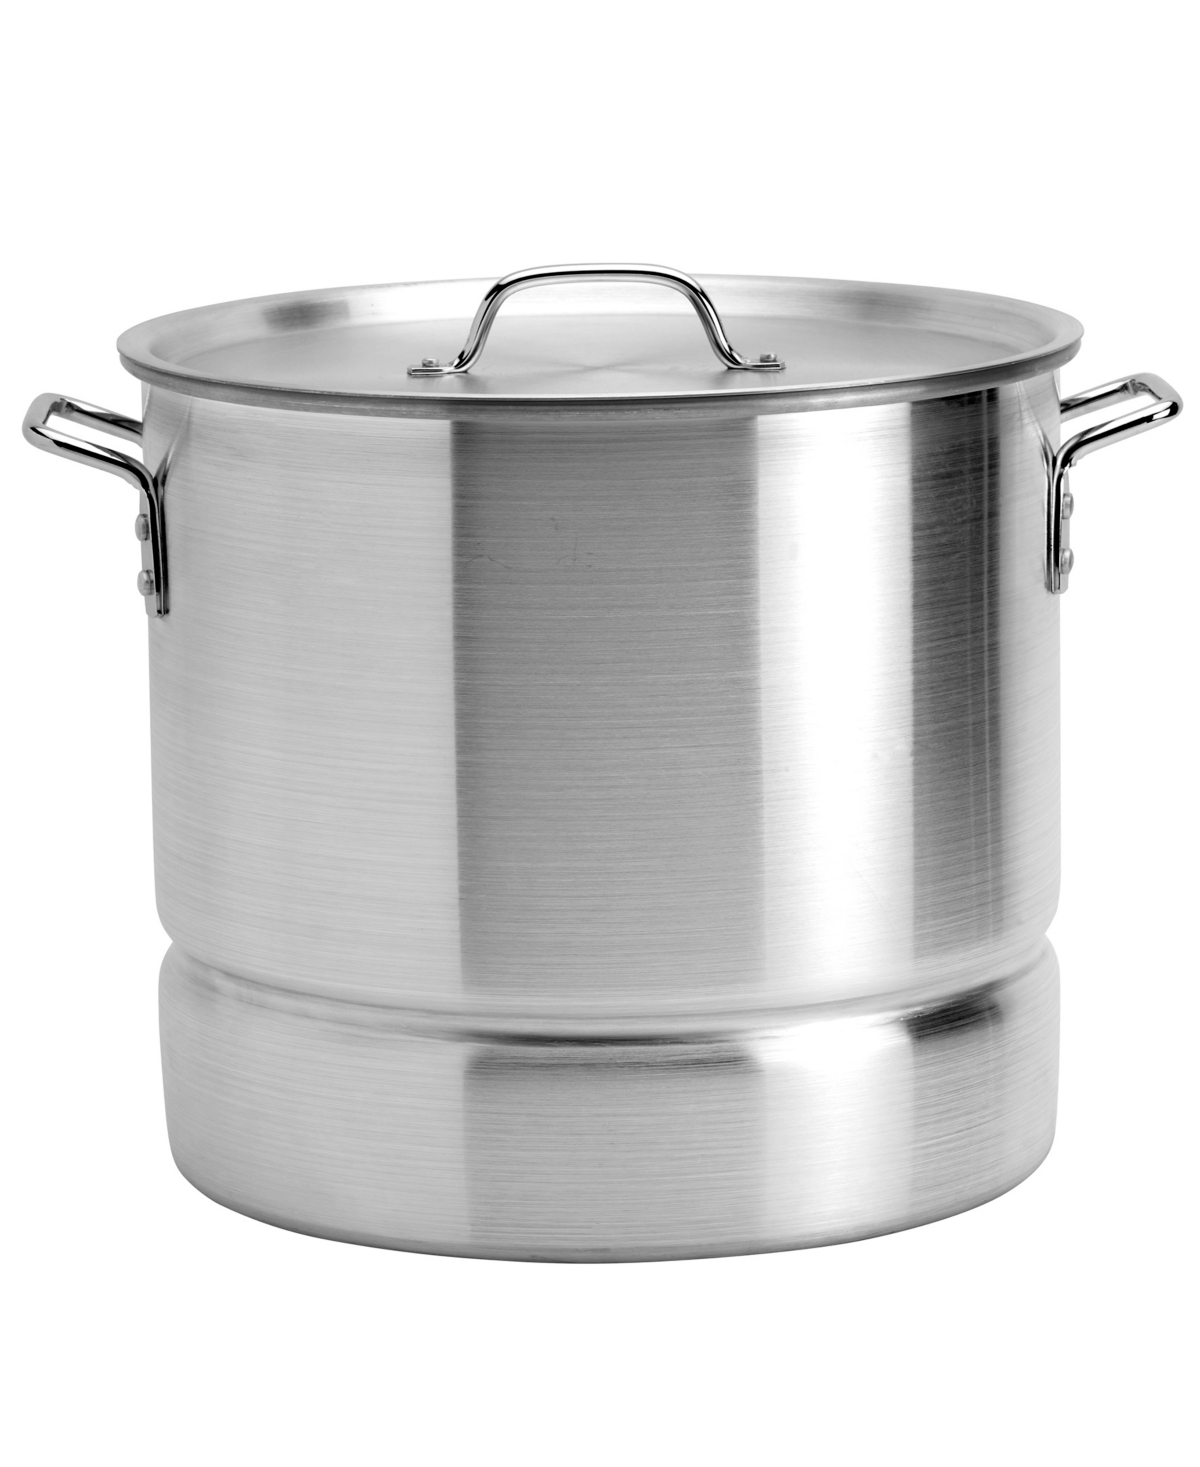 Infuse Latin Aluminum 3 Piece 32 Quart Steamer Set In Silver